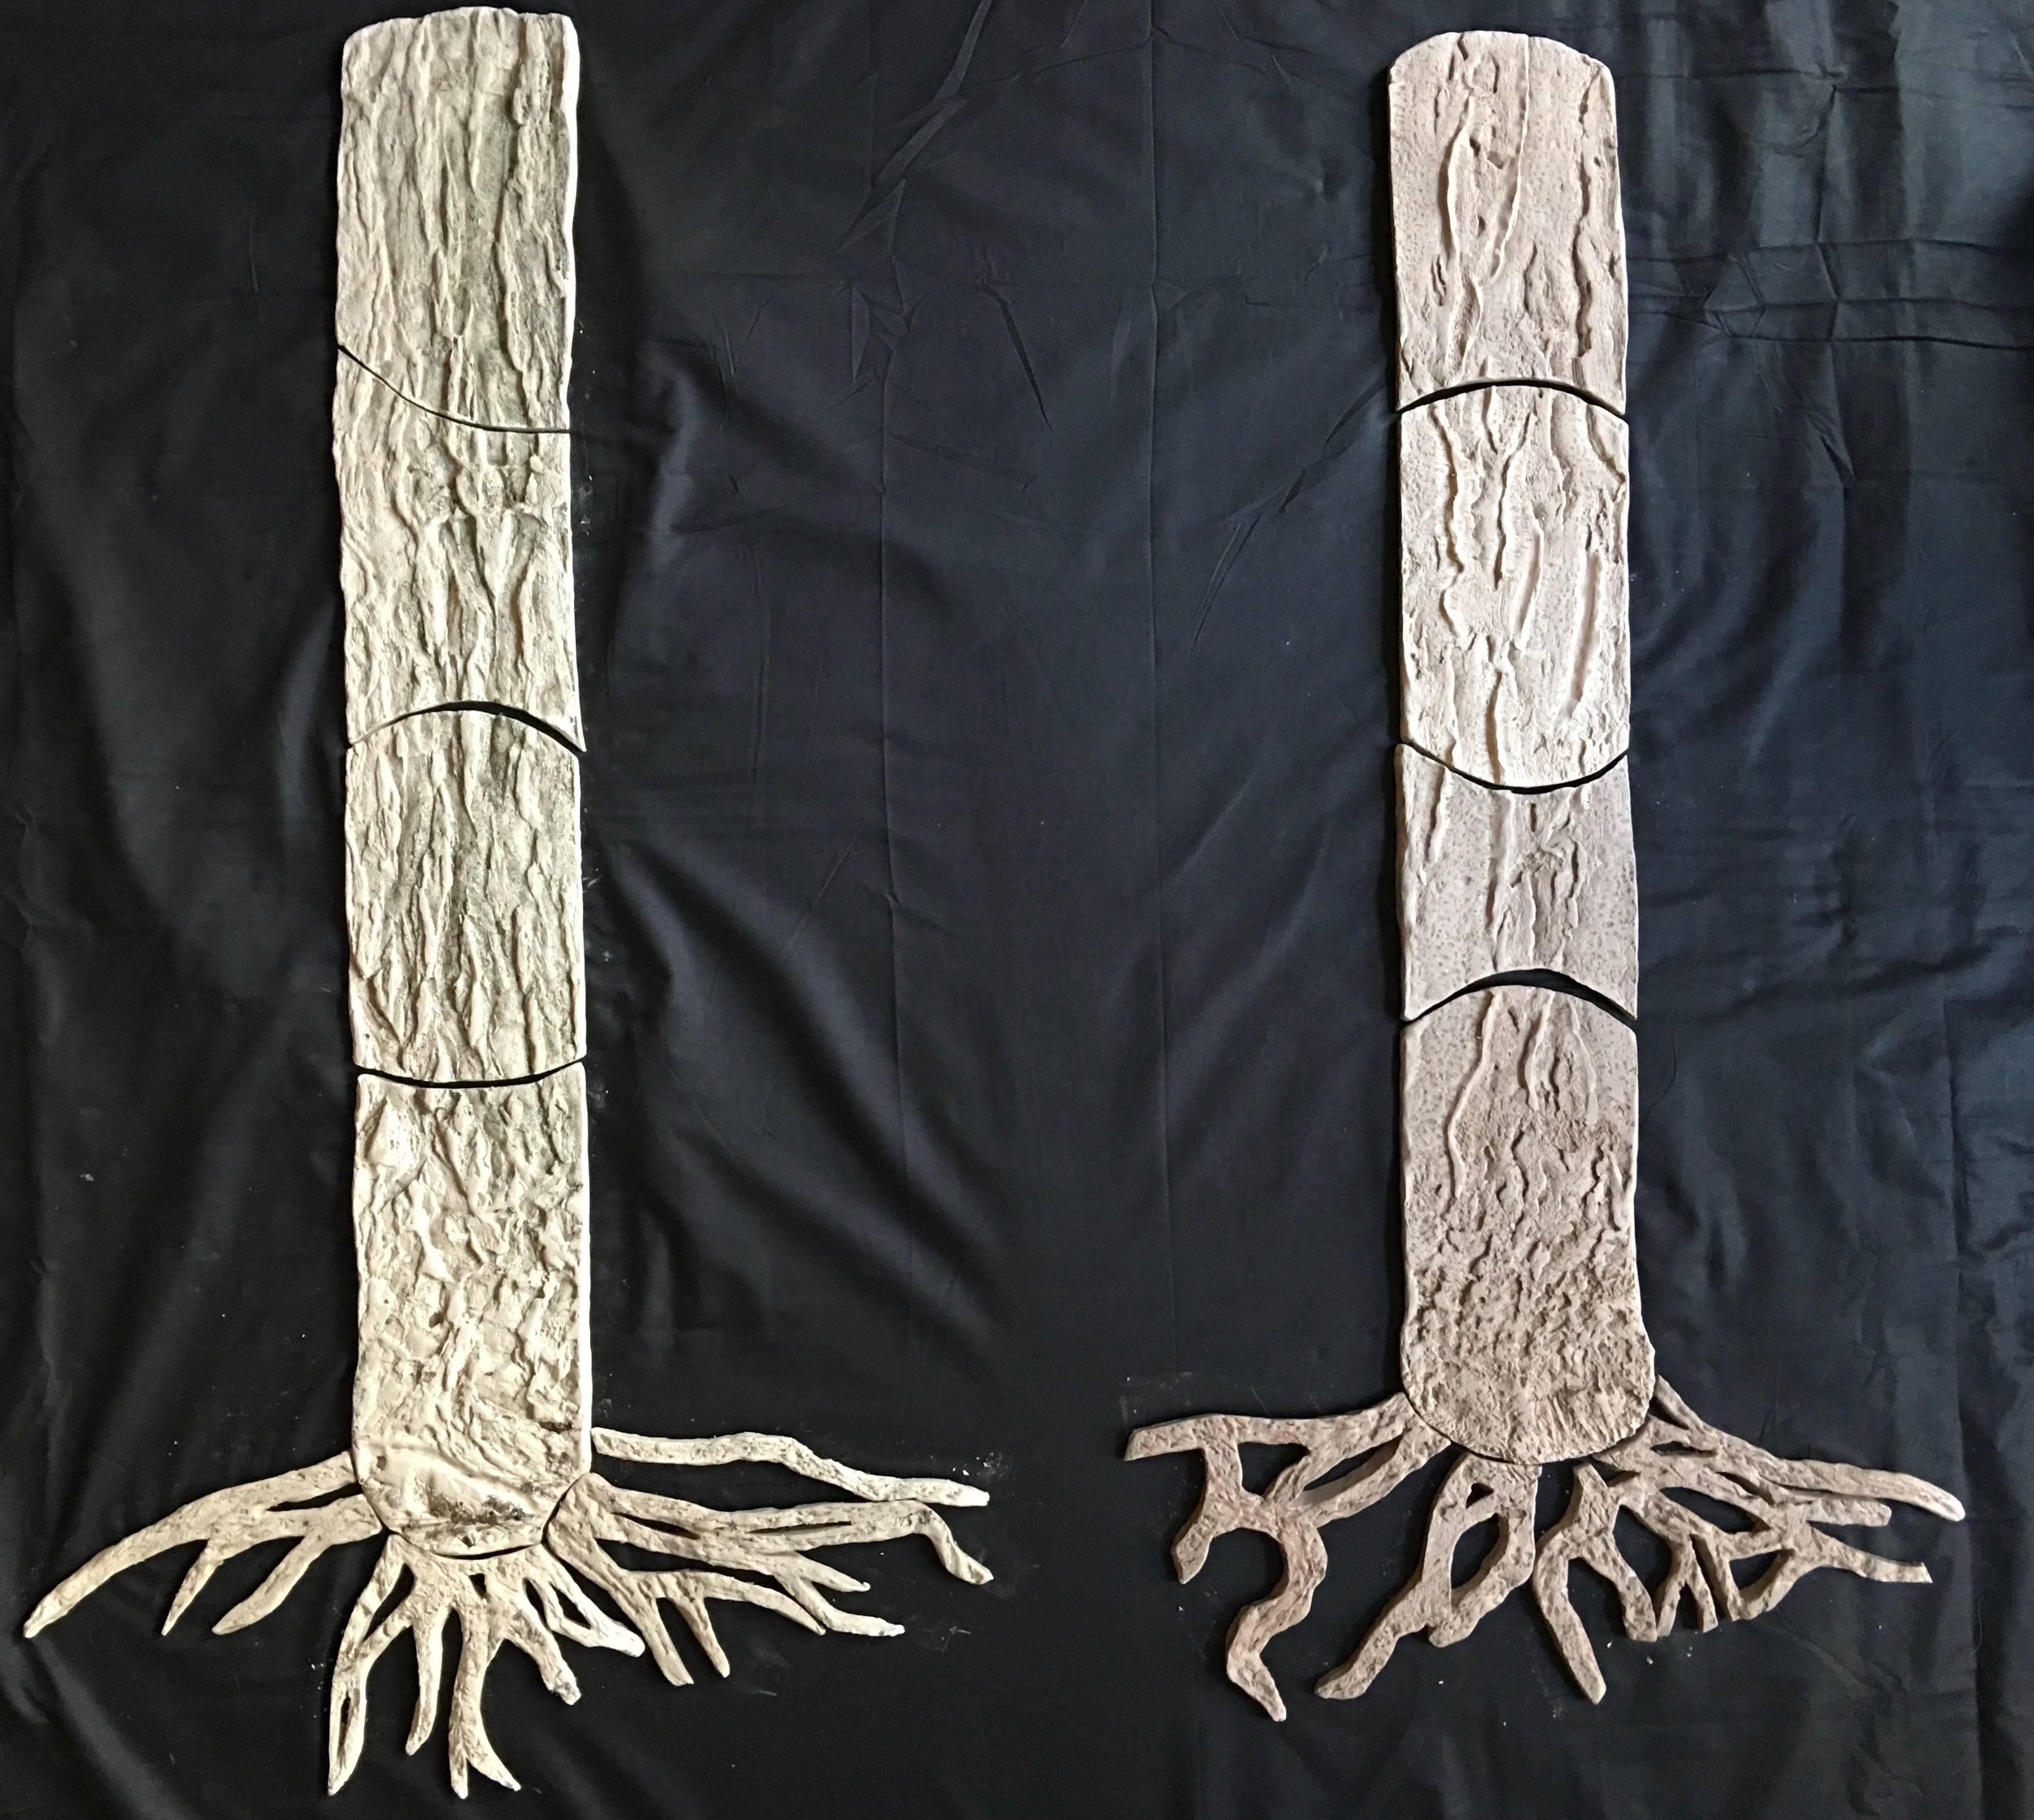 Susan Stair casts portraits of living trees. Their bark reveals race, age, damage and their struggle to survive. 

Trees of the same species communicate underground thru the Wood Wide Web, named by Suzanne Simmard in 1997. Continuing studies are